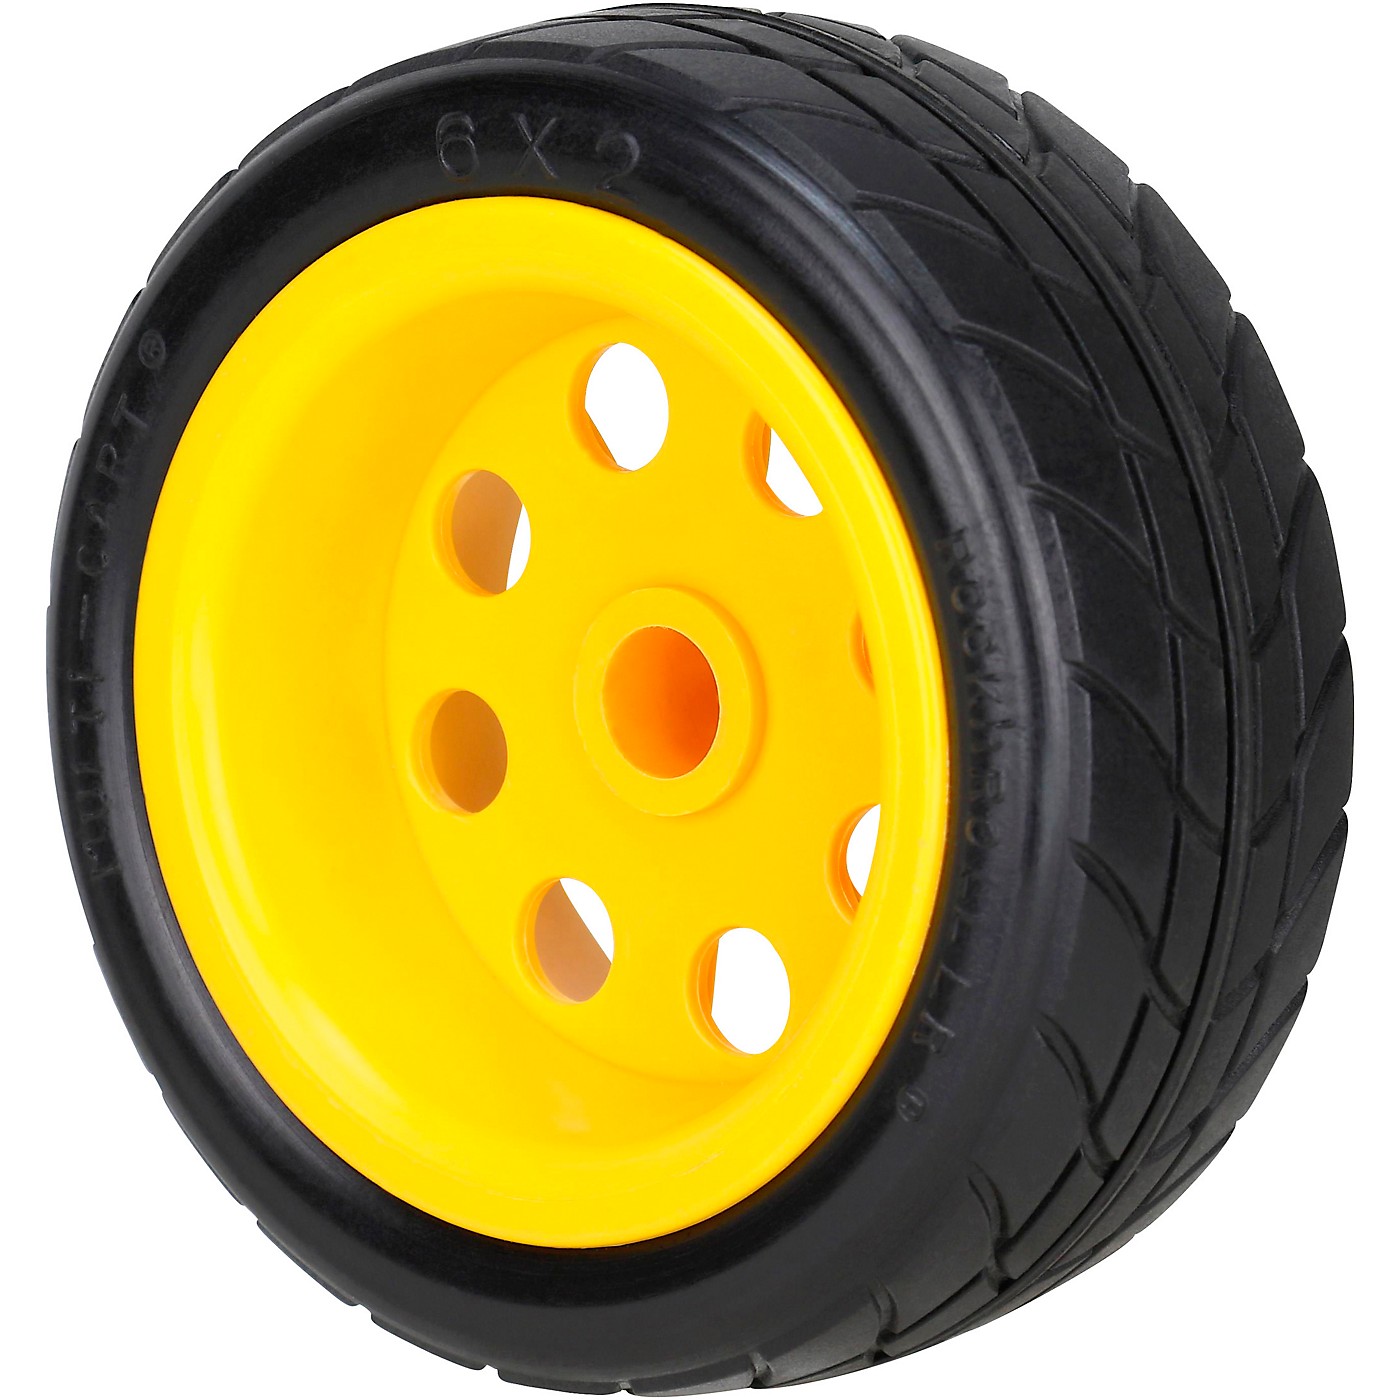 Rock N Roller RWHLO6X2 6x2in. R-Trac Rear Wheel (Upgrade For R2G, R2 Carts) 2-Pack thumbnail